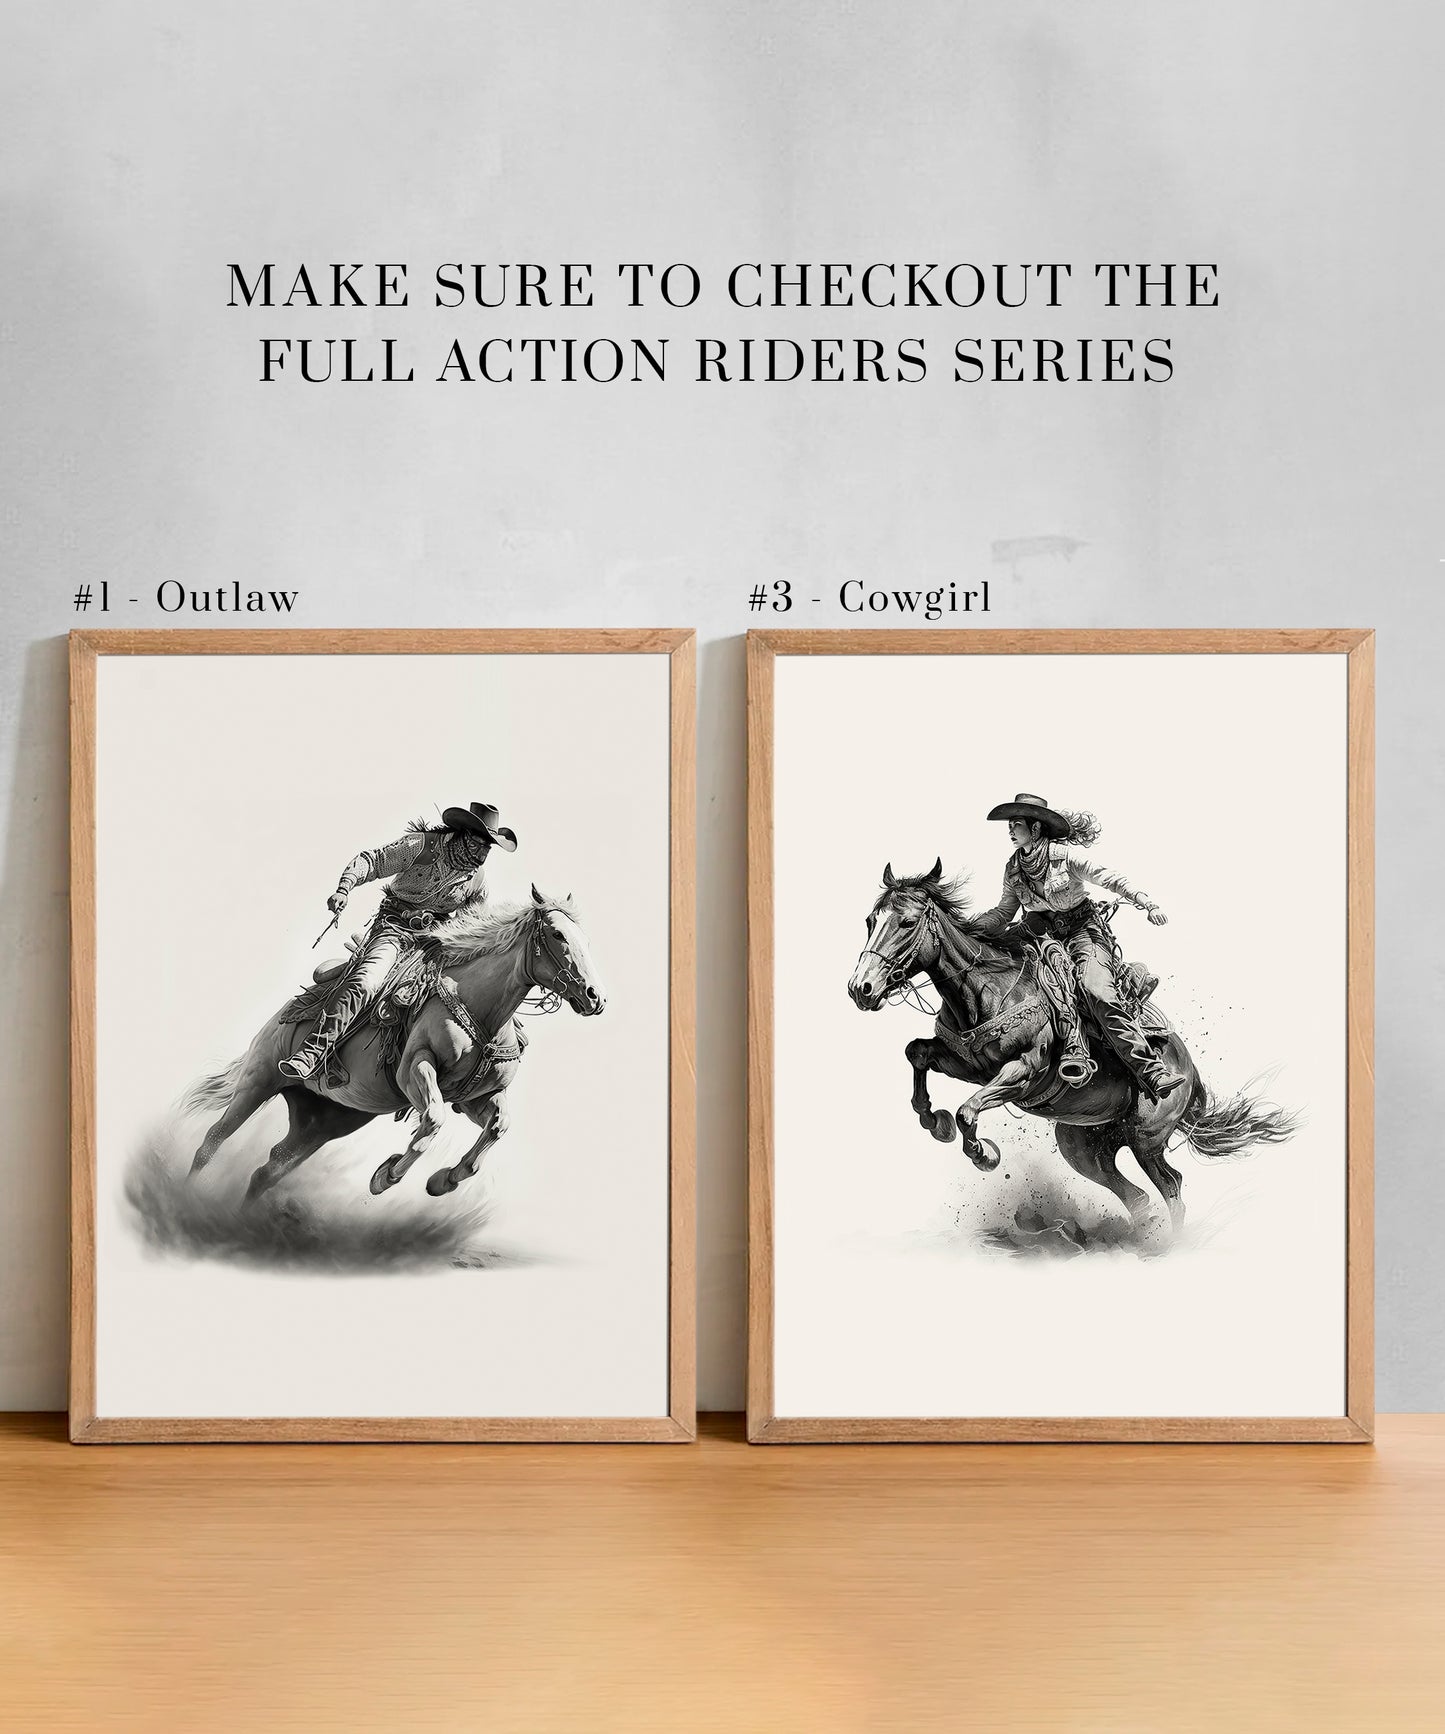 Action Riders #2 of 3 - The Bull Rider